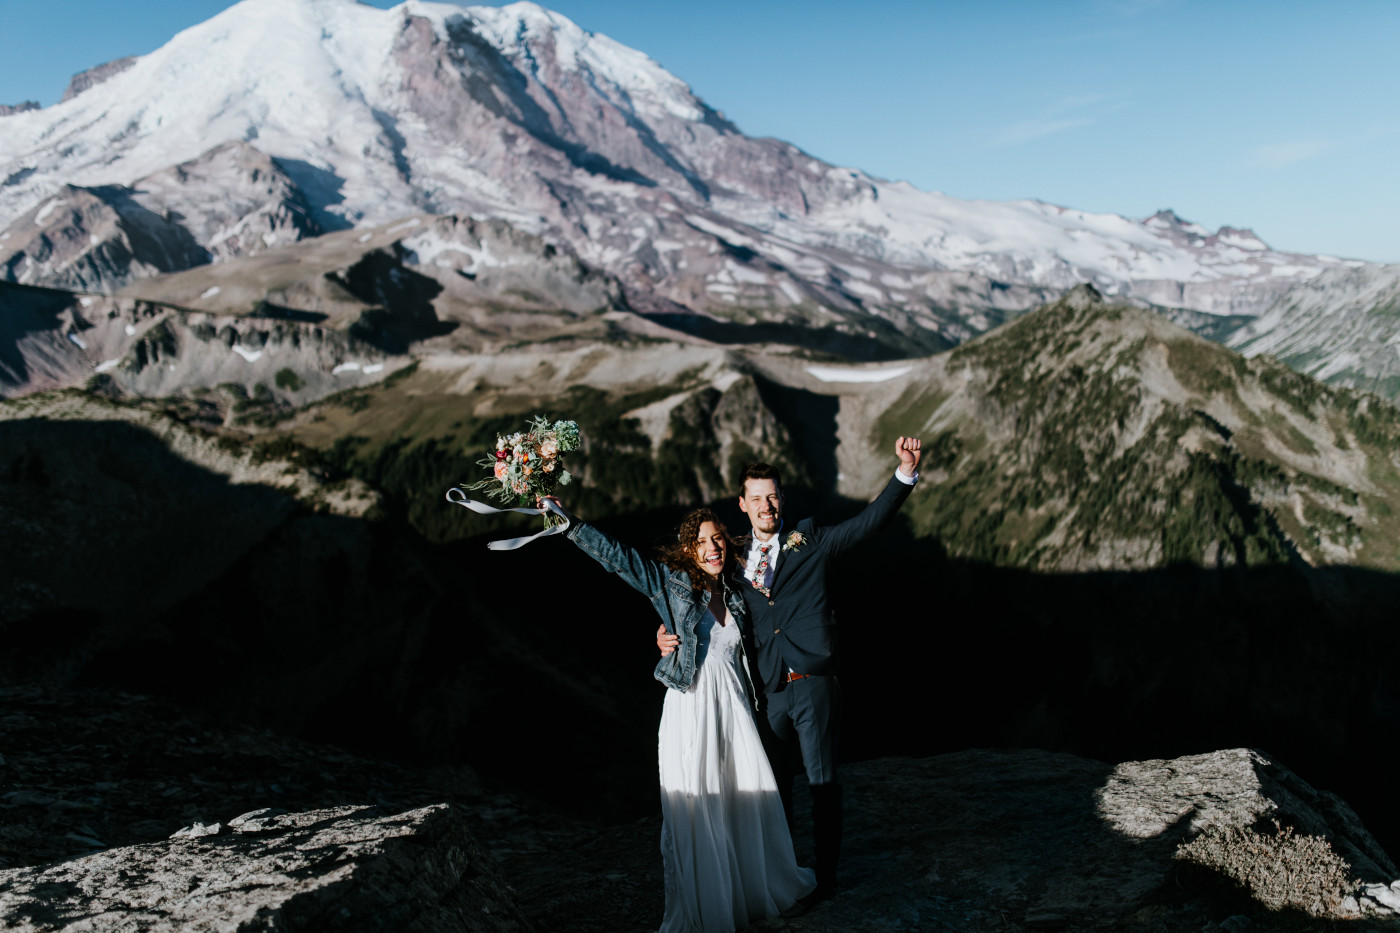 Tasha and Chad stand together and celebrate. Elopement photography at Mount Rainier by Sienna Plus Josh.